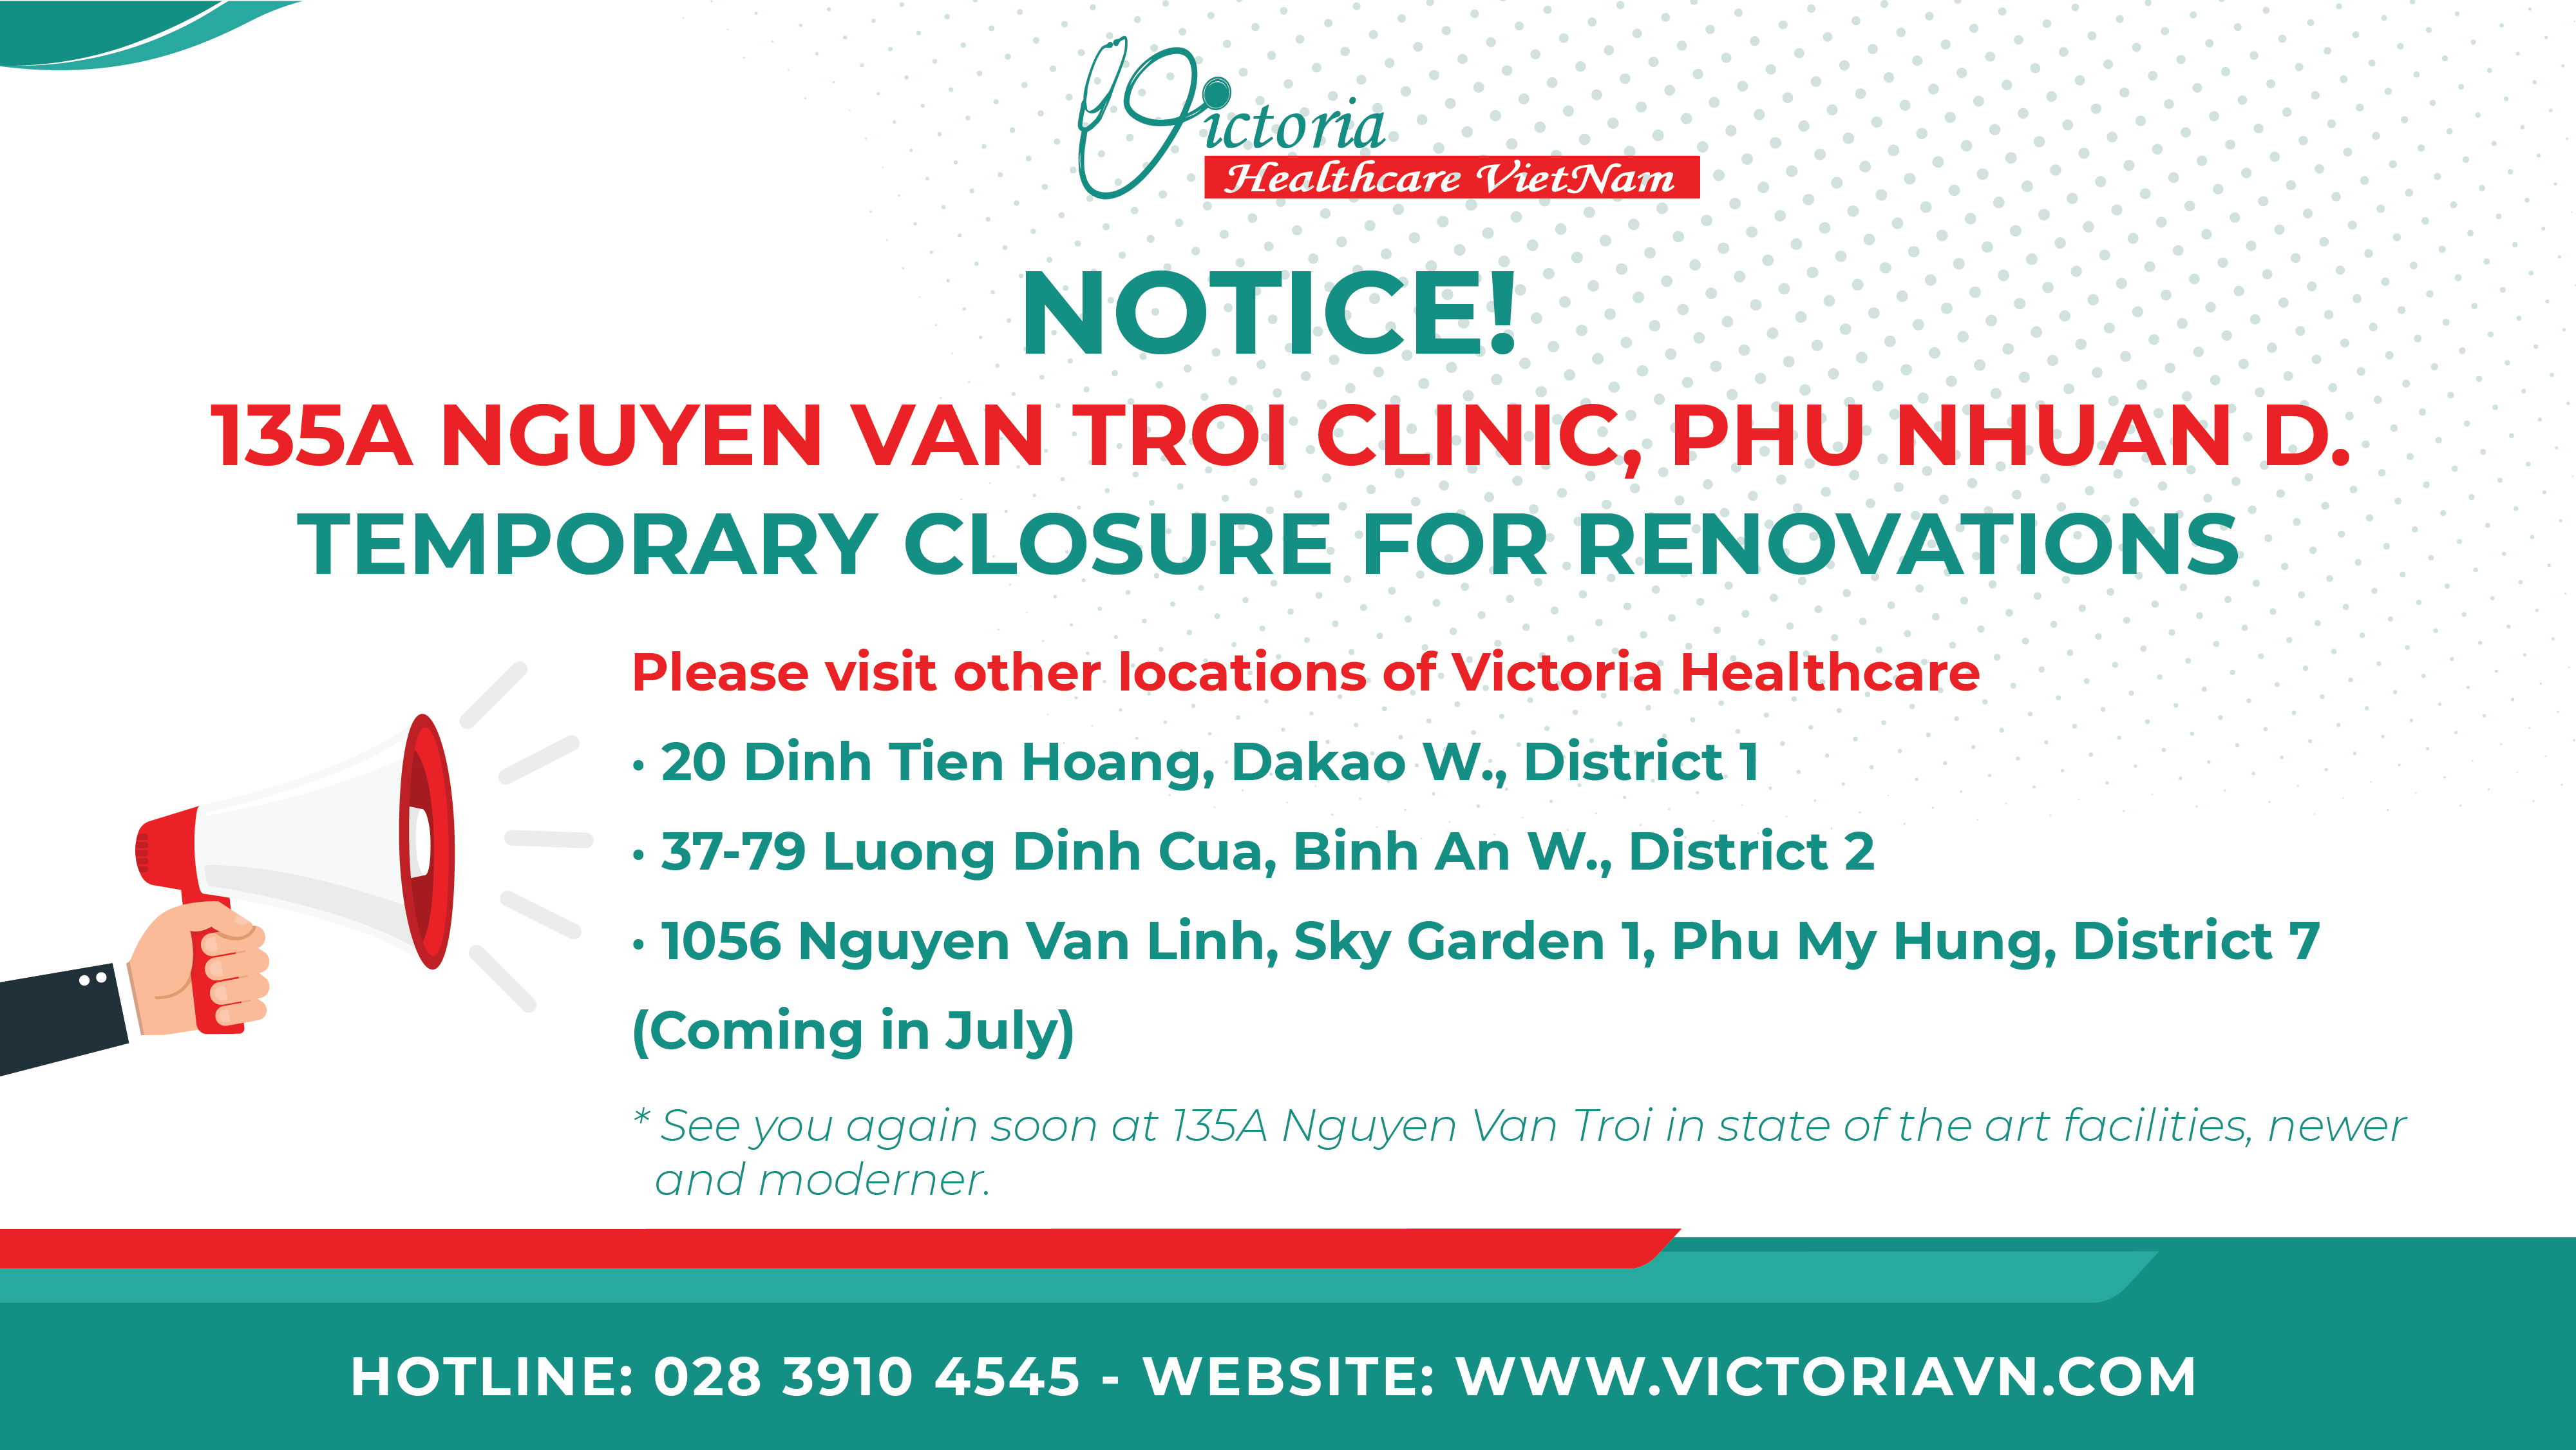 Victoria Healthcare 135A Nguyen Van Troi Clinic temporarily closed for renovations effective June 14 2020